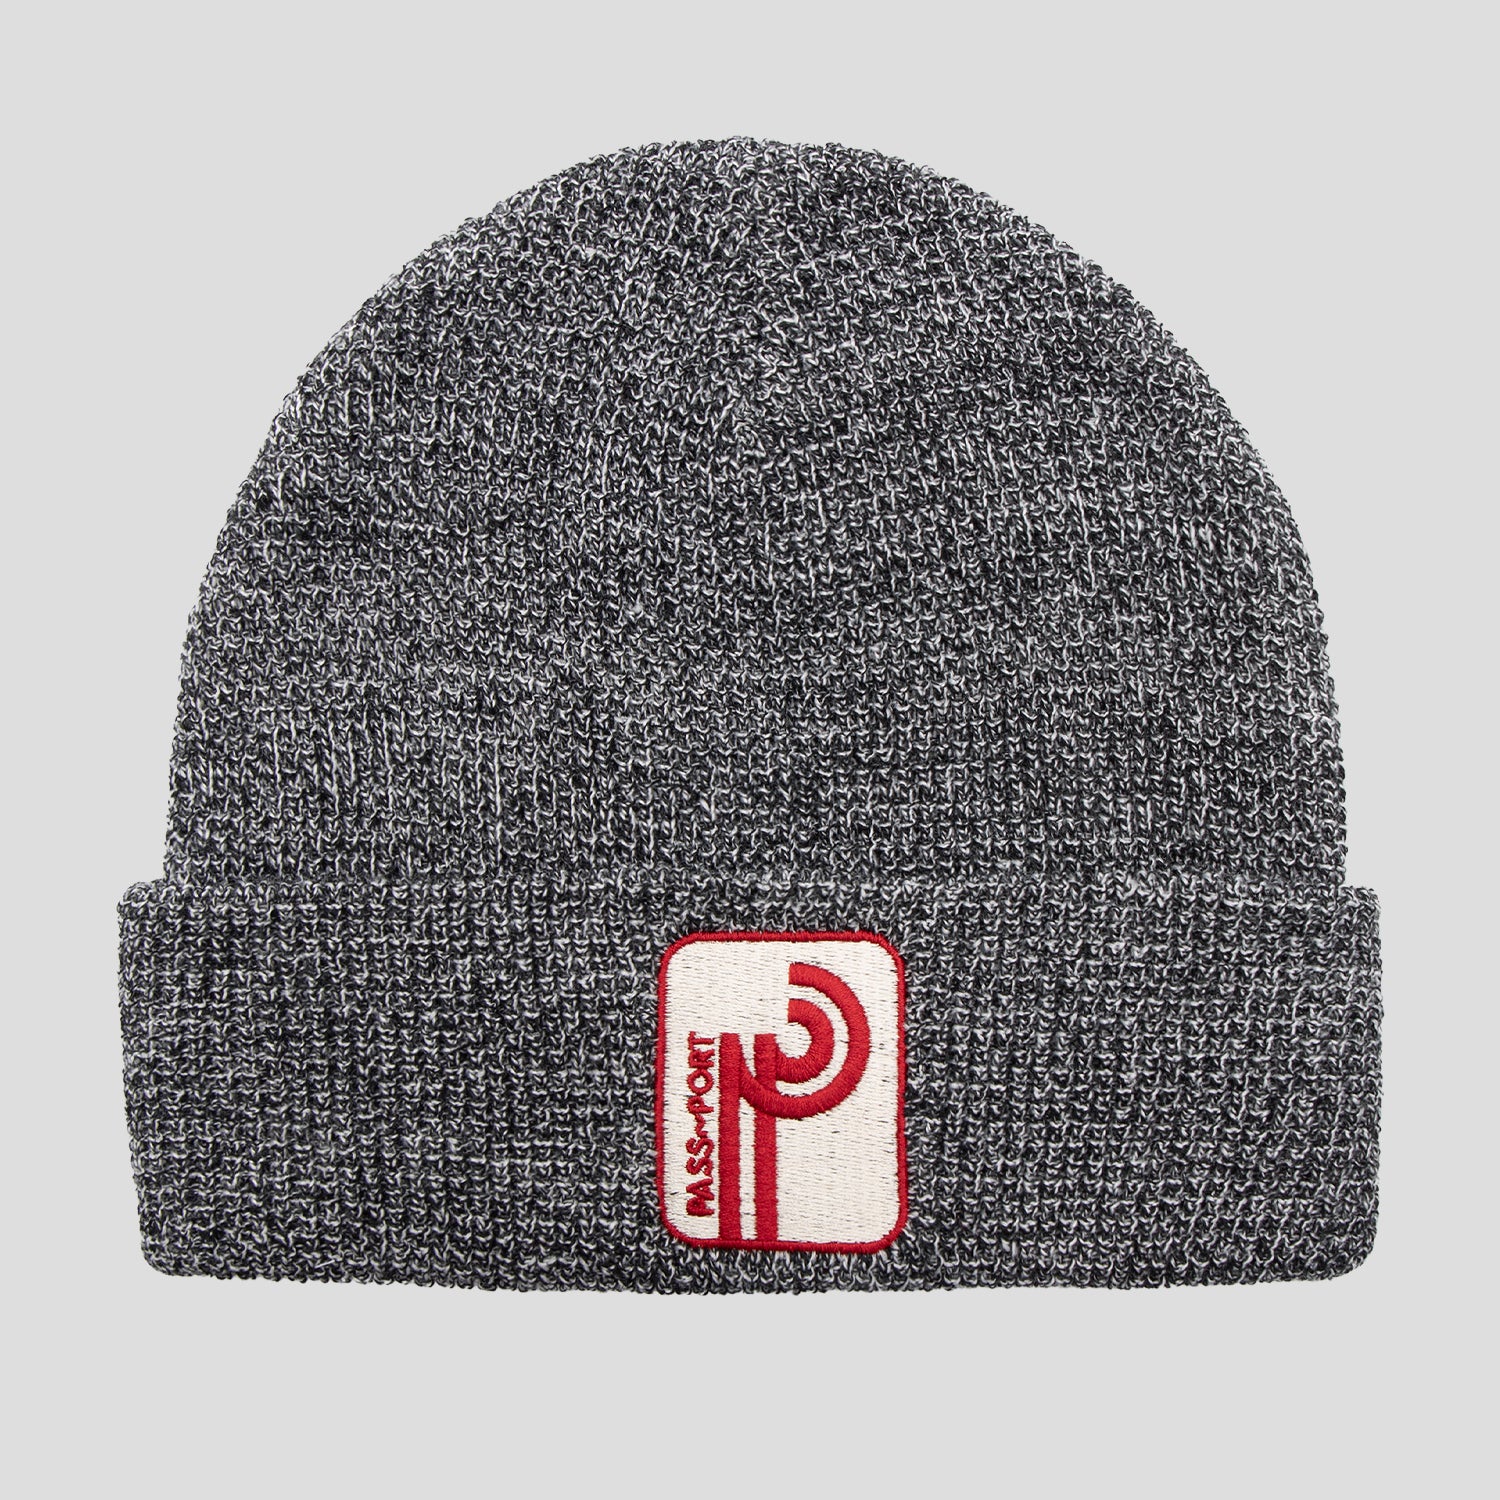 Pass~Port Long Con Waffle Knit Beanie - Grey Speckle